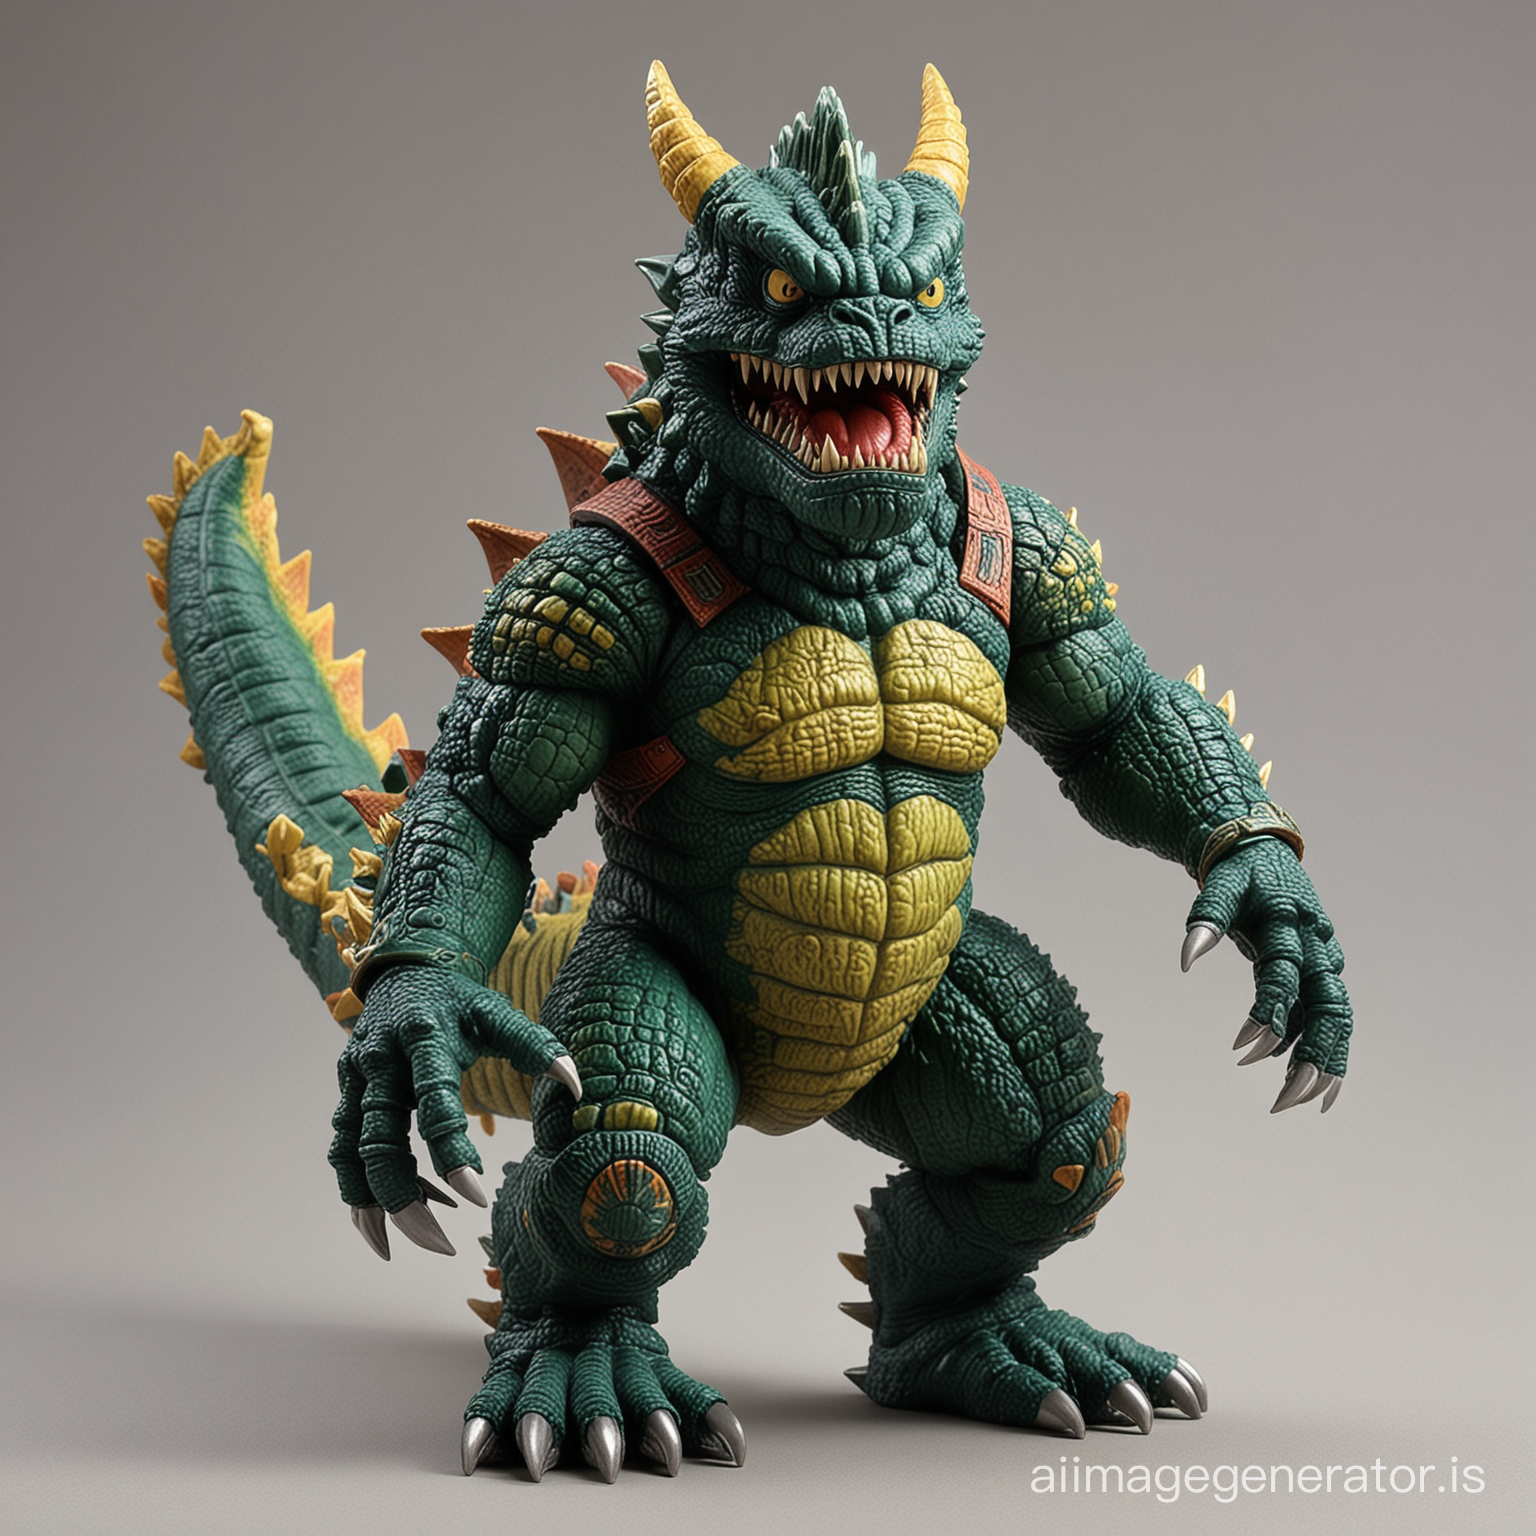 Appearance:  The kaiju figure has a classic, chunky design reminiscent of the monster toys popular in the 1970s. It stands about 8 inches tall, with a sturdy, solid build. The plastic used is of good quality but not overly glossy, giving it an authentic retro feel. The figure is primarily a vibrant shade of green, with hints of other colors like red, blue, and yellow for additional detailing. Its face features large, expressive eyes with a mischievous or fierce expression, capturing the spirit of classic kaiju monsters. The body is adorned with scales or textured patterns, adding depth and interest to the design. The pose of the figure is dynamic, with arms raised or claws extended, as if in mid-roar or attack. Details:  To enhance the vintage feel, the figure has deliberate imperfections like seam lines or rough edges, reminiscent of old-school toy manufacturing processes. Paint application is simple yet effective, with bold colors and minimal shading. The figure may have small, removable accessories like a mini-city or vehicles for the kaiju to interact with, adding play value. On the underside of the figure, there's a copyright stamp or logo reminiscent of vintage toy branding, adding to its nostalgic charm. Packaging:  The kaiju figure comes packaged in a retro-style box adorned with colorful artwork depicting scenes of destruction and mayhem. The box features bold, eye-catching fonts and graphics reminiscent of 1970s toy packaging, with phrases like "Kaiju Attack!" or "Beware the Monster!". Overall, this vintage-style kaiju figure captures the essence of classic 1970s monster toys, appealing to the hearts of those who grew up during that era with its nostalgic design and affordable, plastic construction.       The figure do looks like a godzilla-style monster. with some japanese style in it.